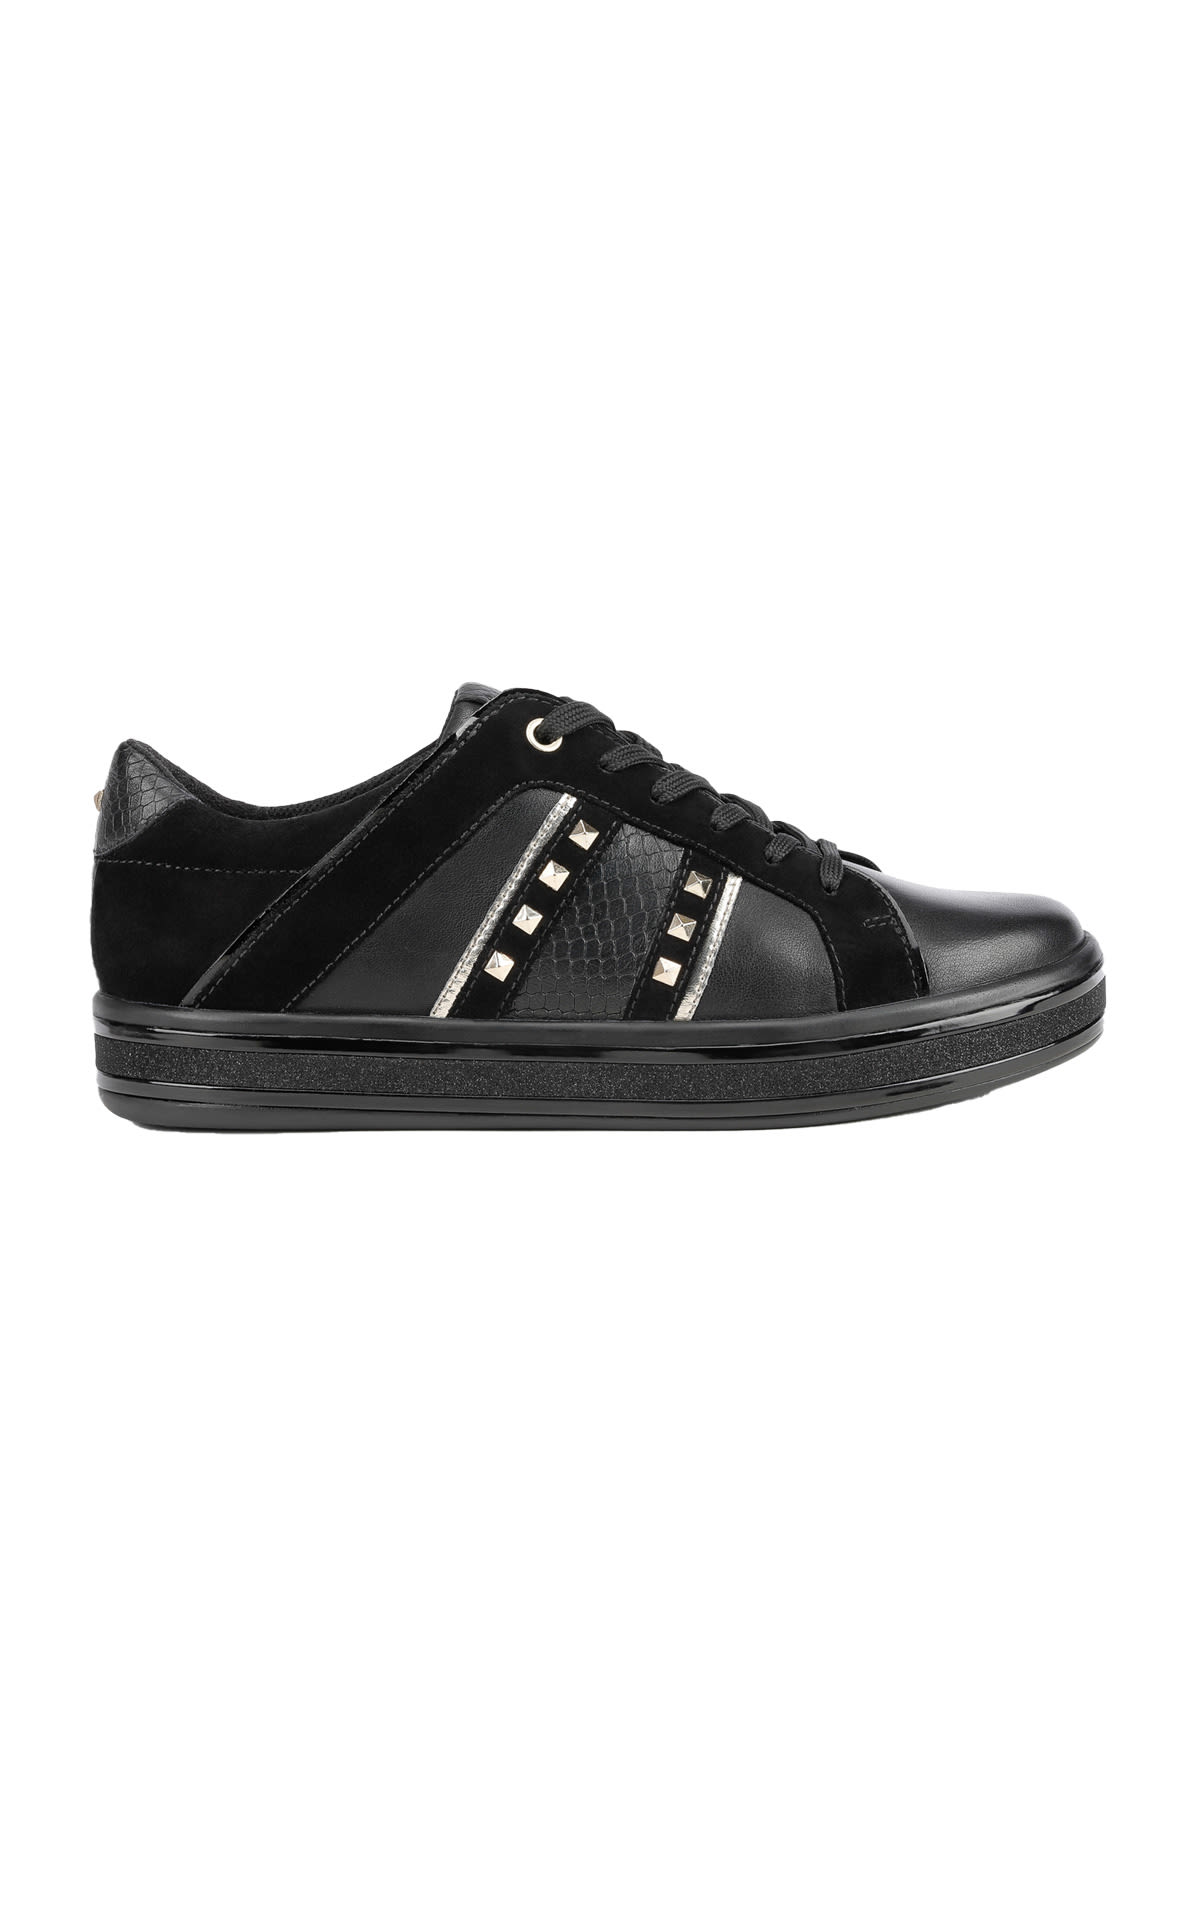 Women's black sneakers with studs Geox